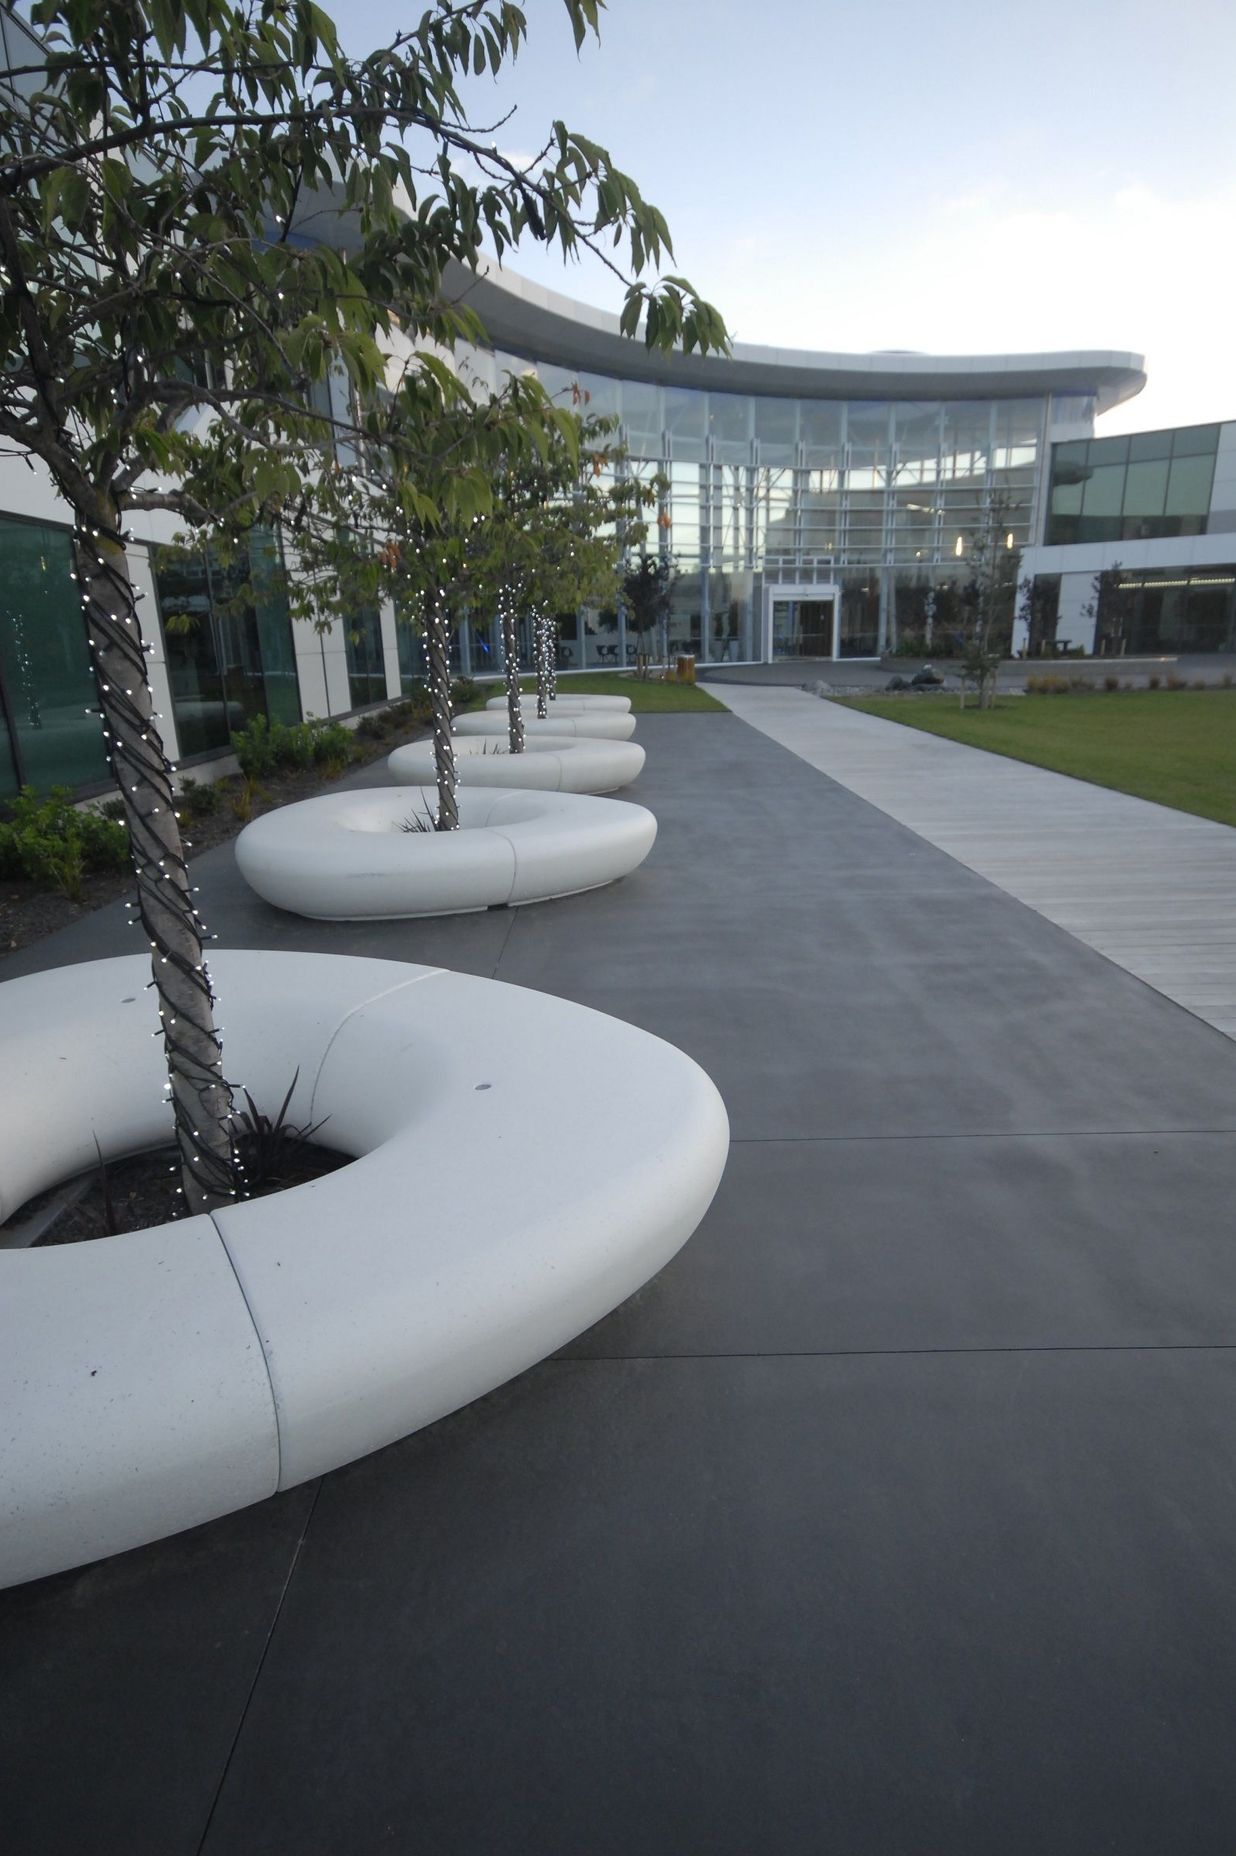 Park-like setting for award winning commercial campus in Christchurch